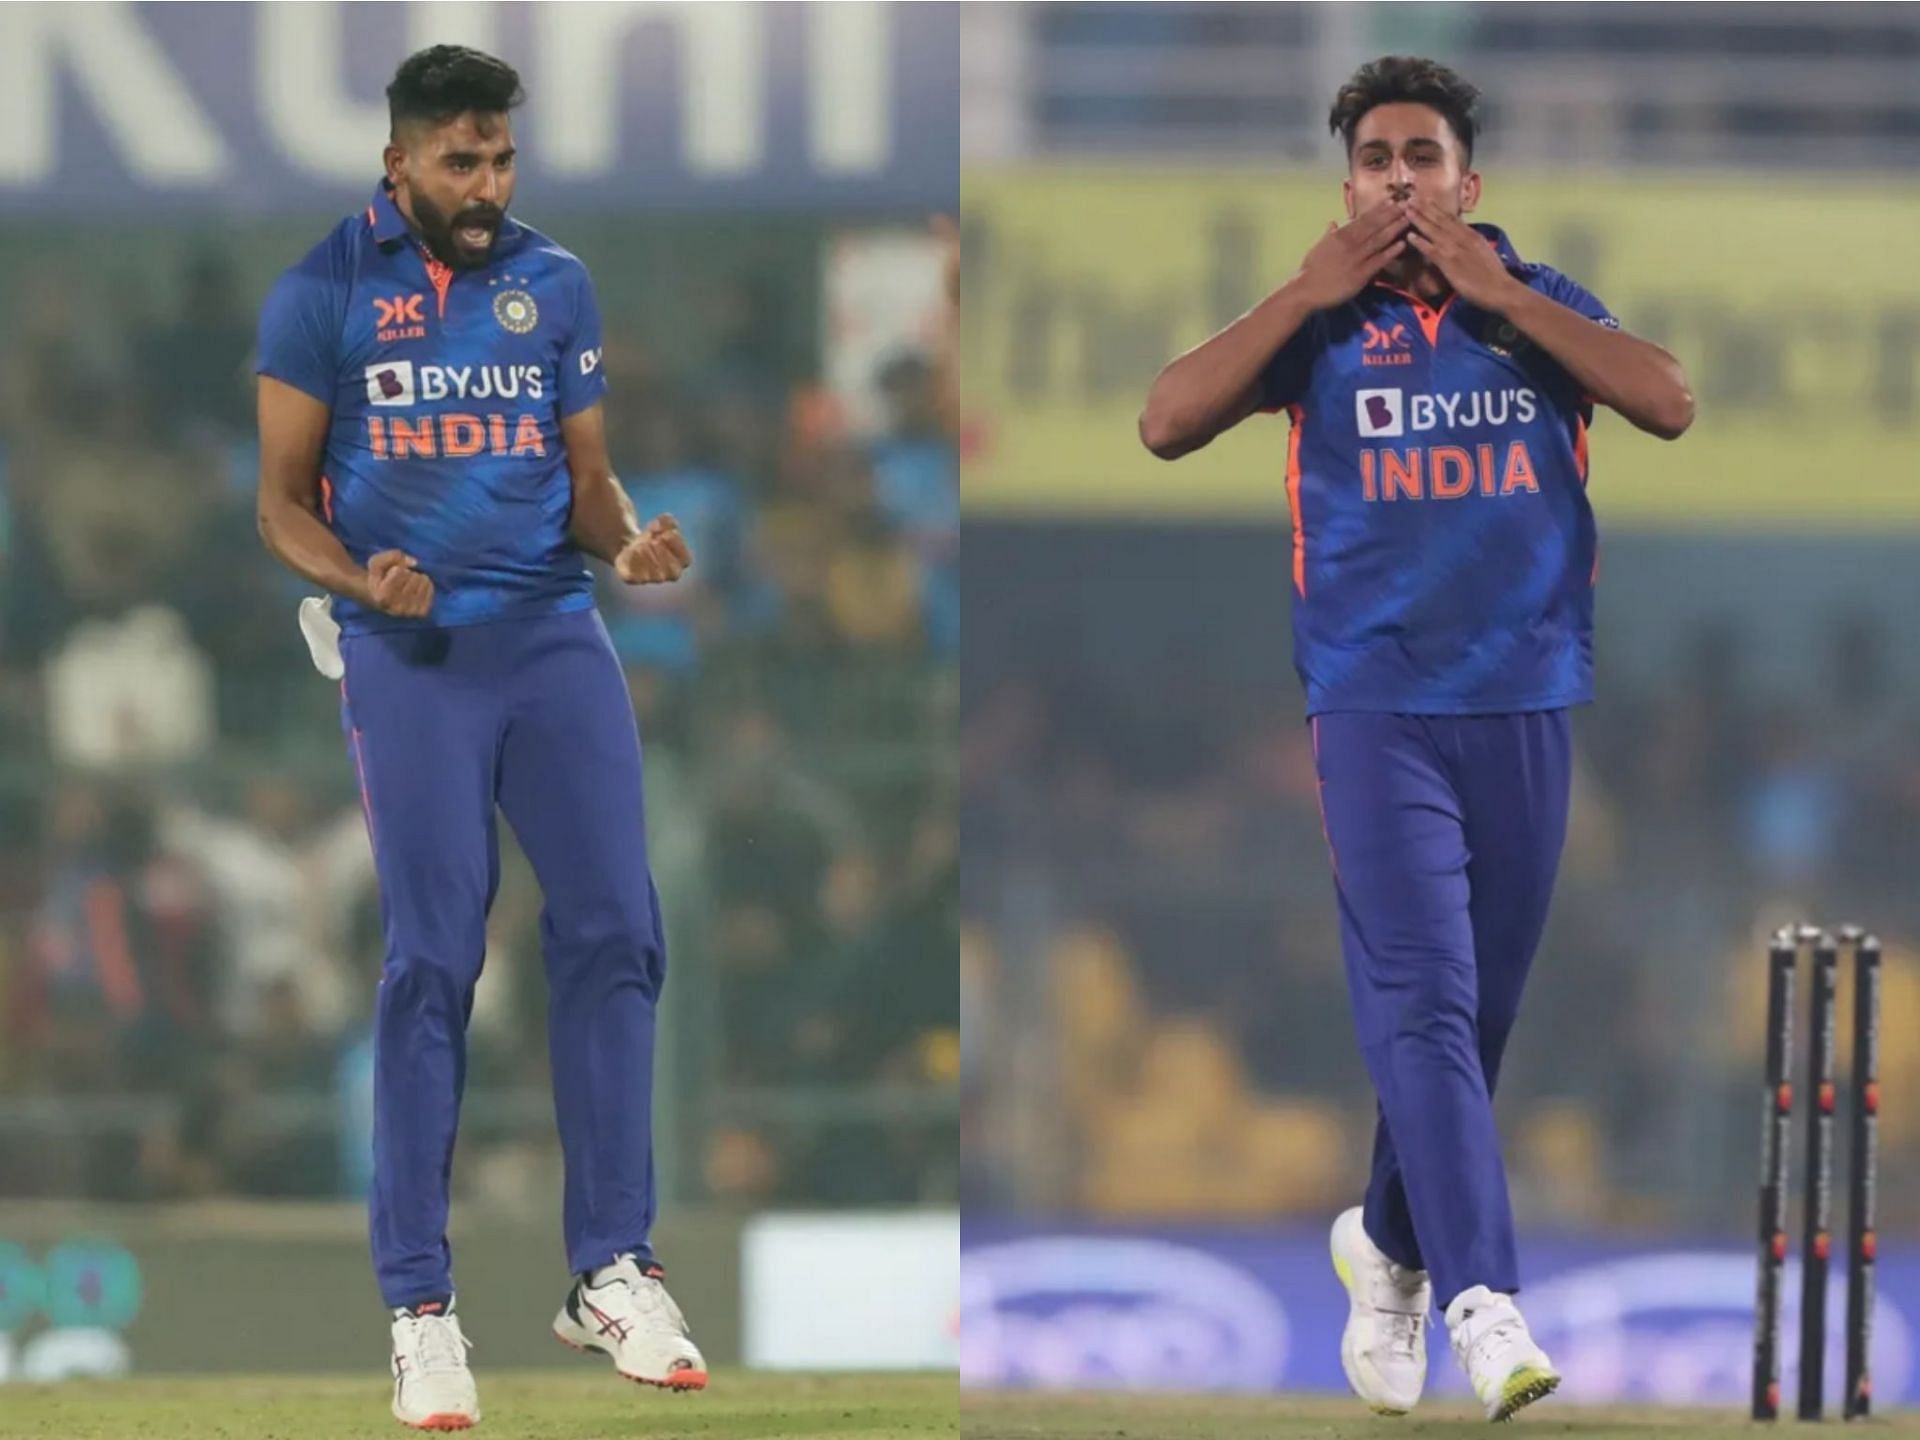 Mohammed Siraj and Umran Malik are two of the most improved Indian cers in recent times [Pic Credit: BCCI]